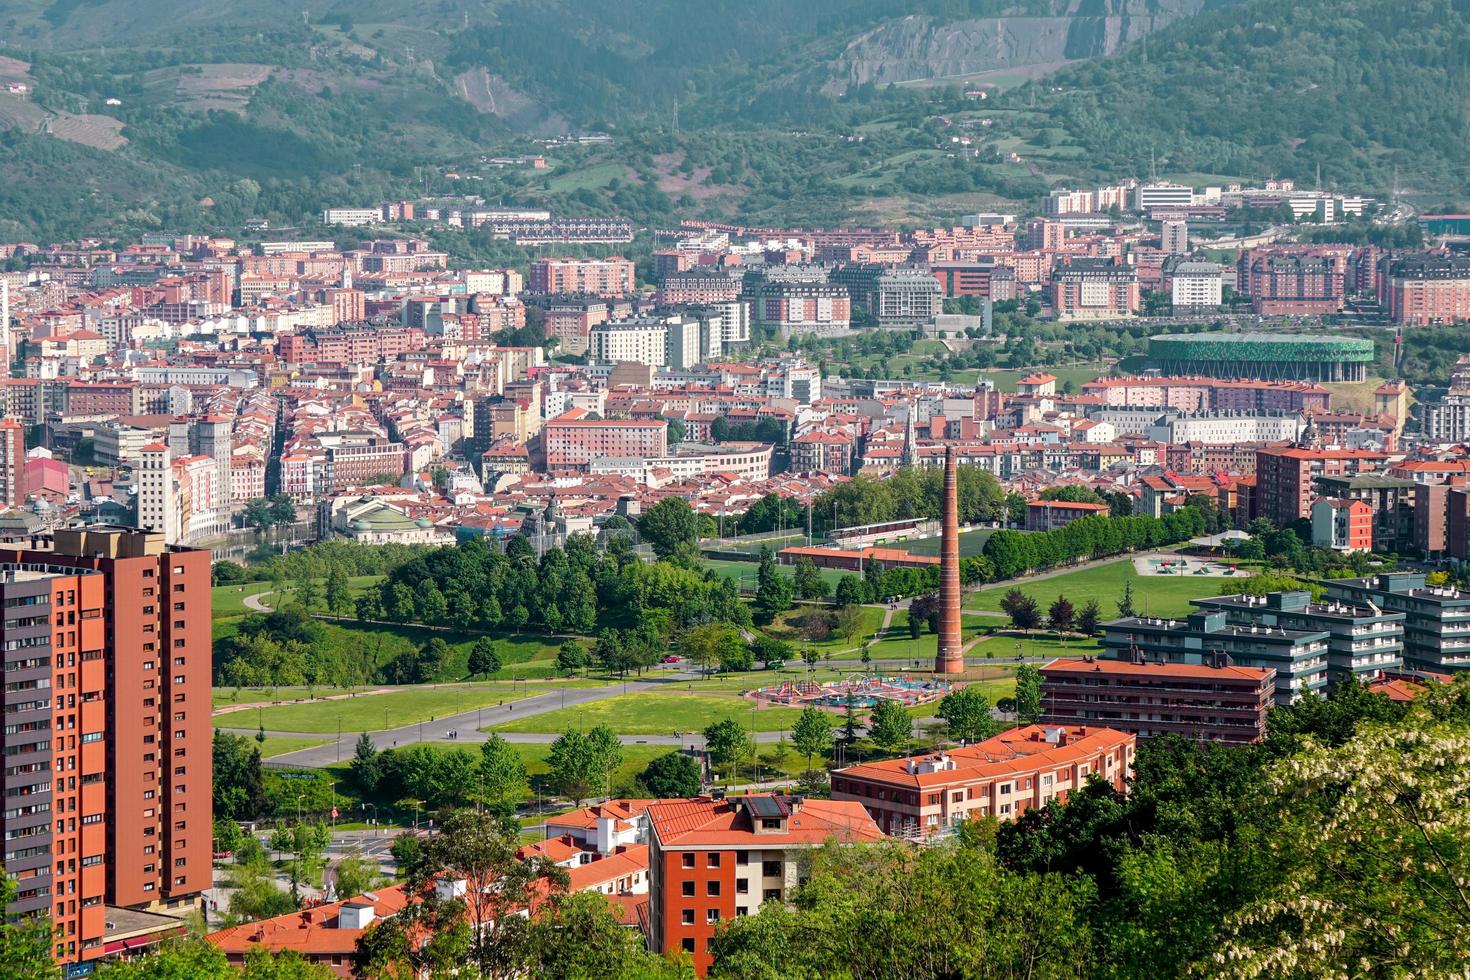 cityscape from Bilbao city, Basque country, Spain, travel destinations photo